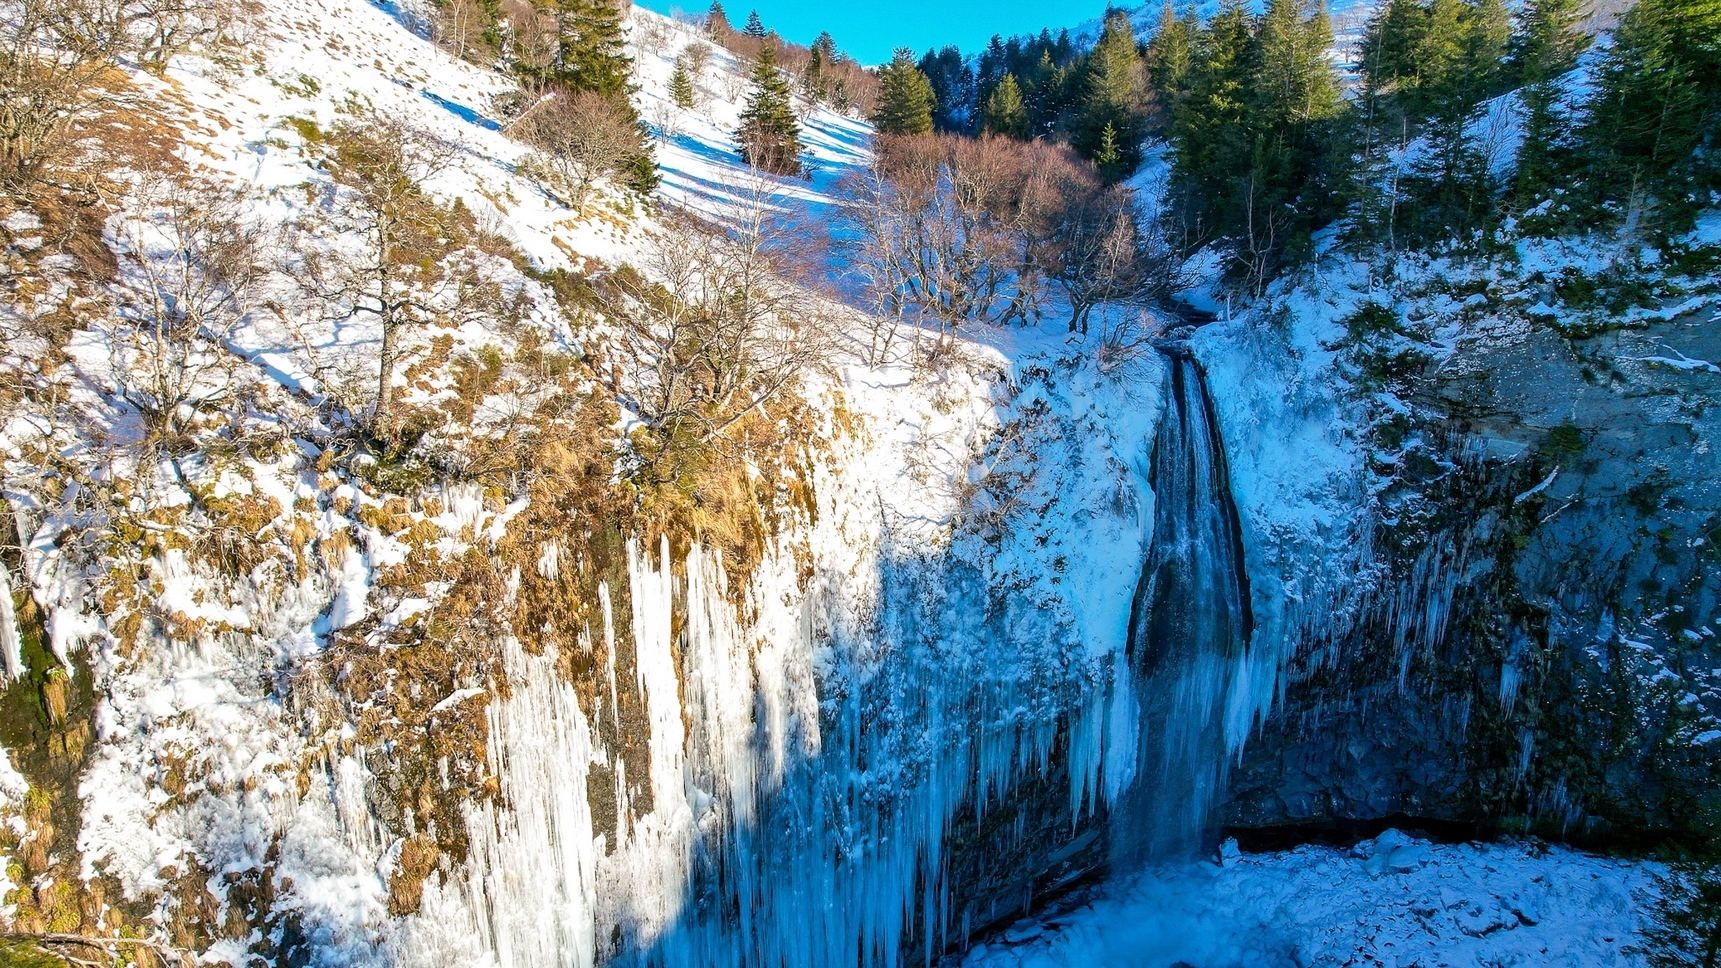 The Great Waterfall taken by the Ice, Waterfall in Auvergne